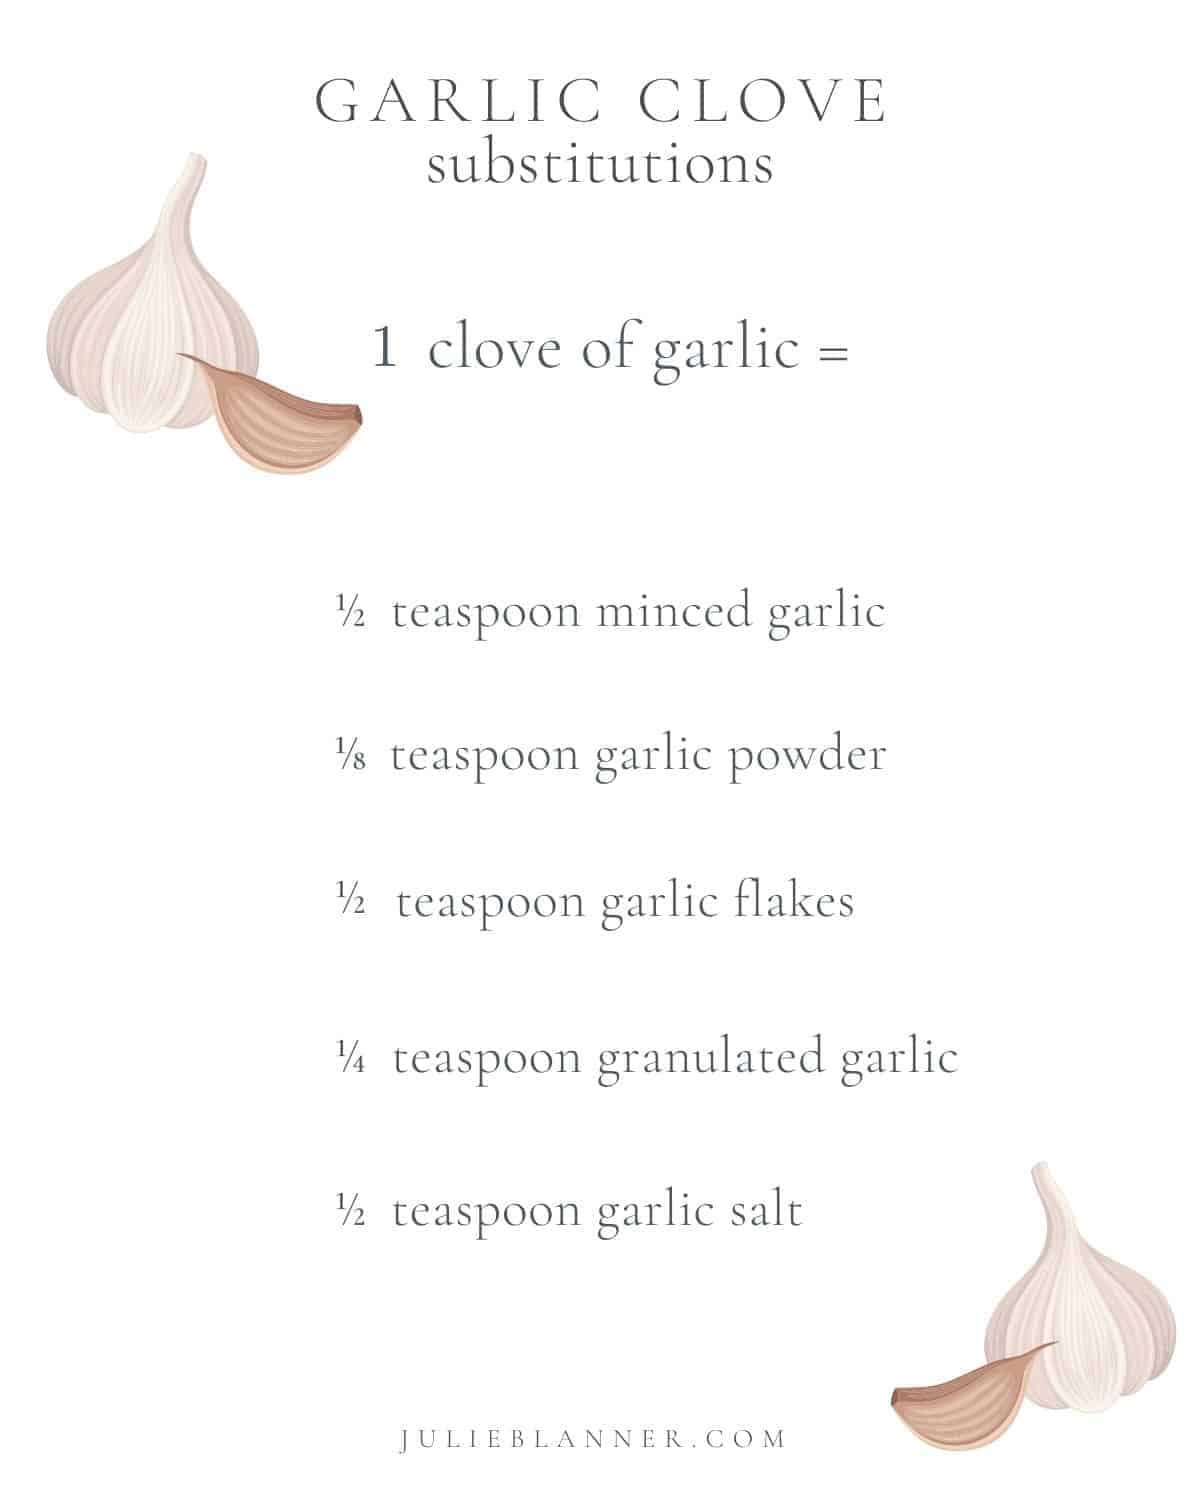 how much minced garlic equals one clove